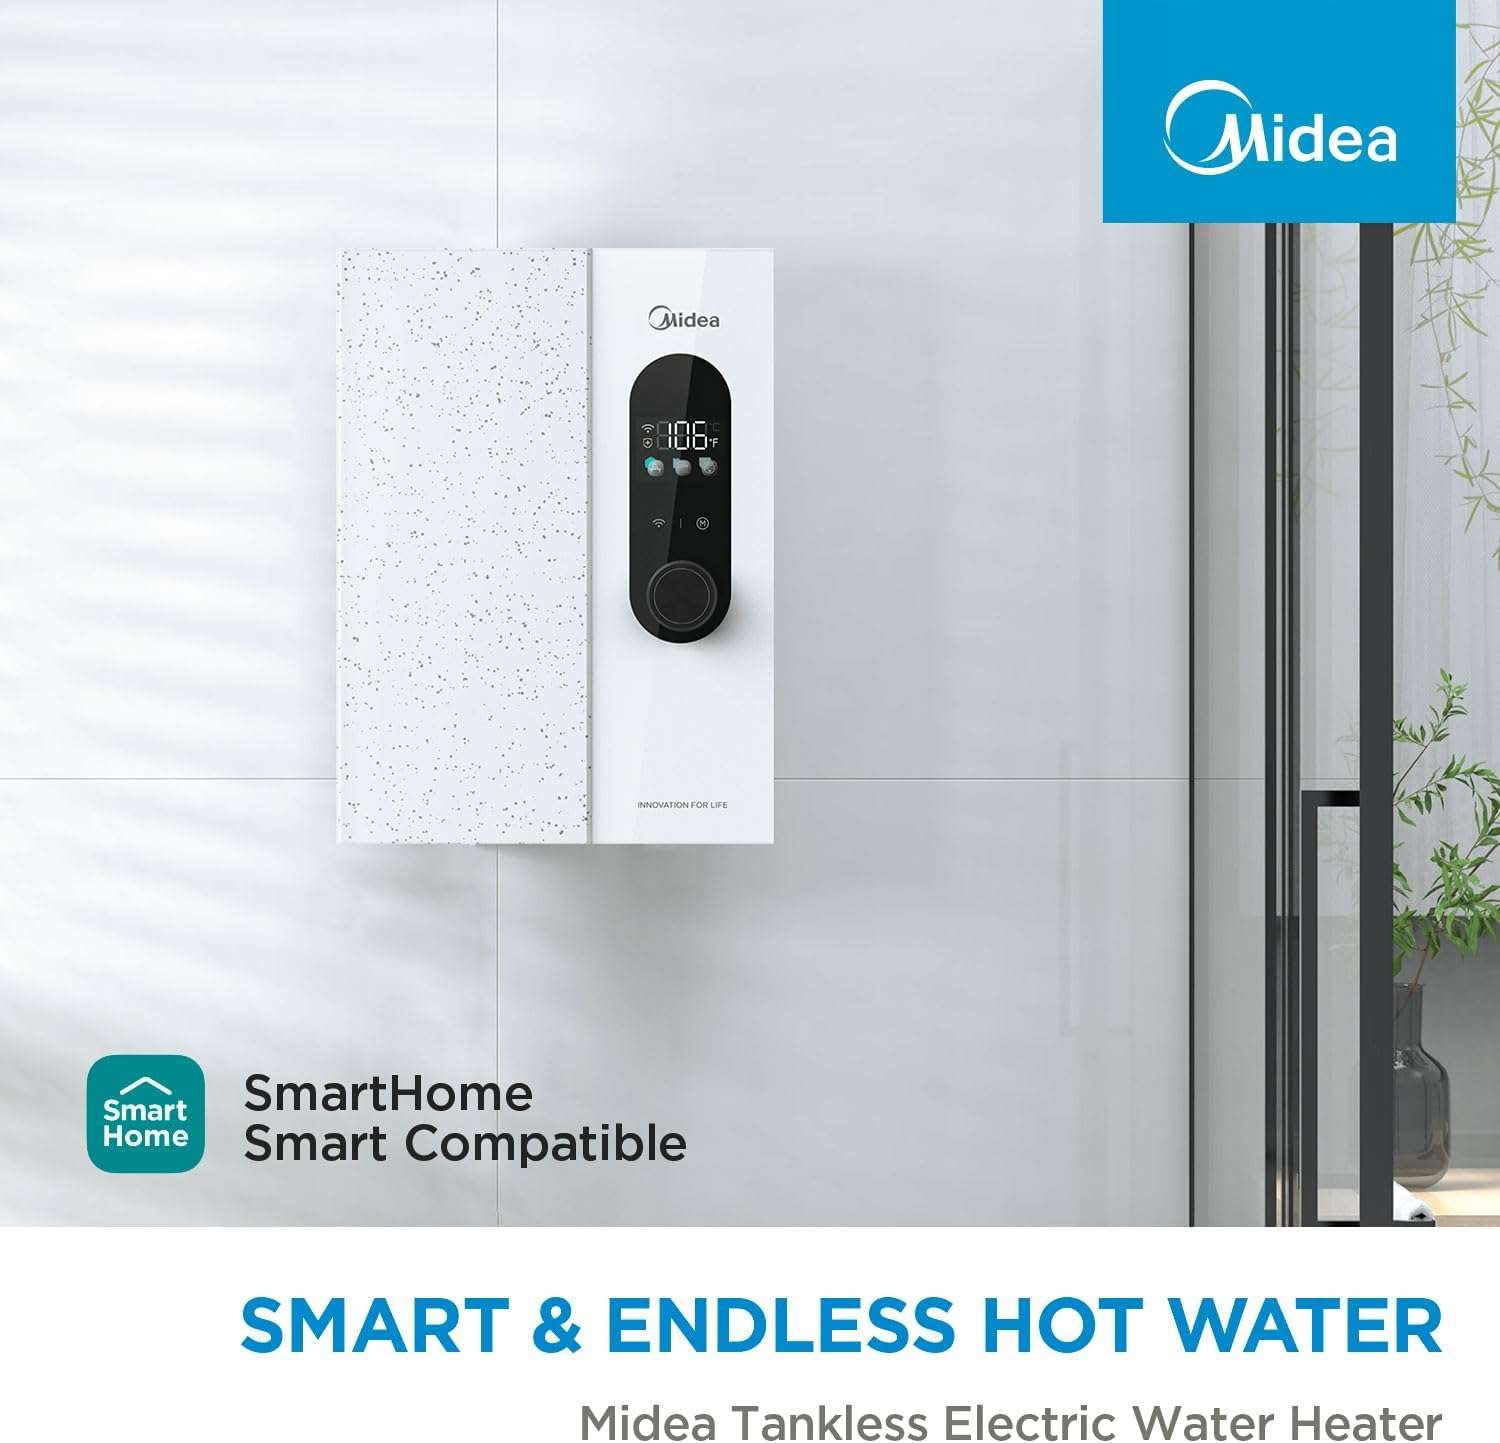 https://d1pjg4o0tbonat.cloudfront.net/content/dam/midea-aem/us/water-heaters/midea-18kw-electric-tankless-water-heater,-touch-control,-wi-fi-control,-led-display,-child-mode,-240-volts-with-automatic-power-modulation,-on-demand-hot-water,-white/smart-and-endless-hot-water.jpg/jcr:content/renditions/cq5dam.web.5000.5000.jpeg